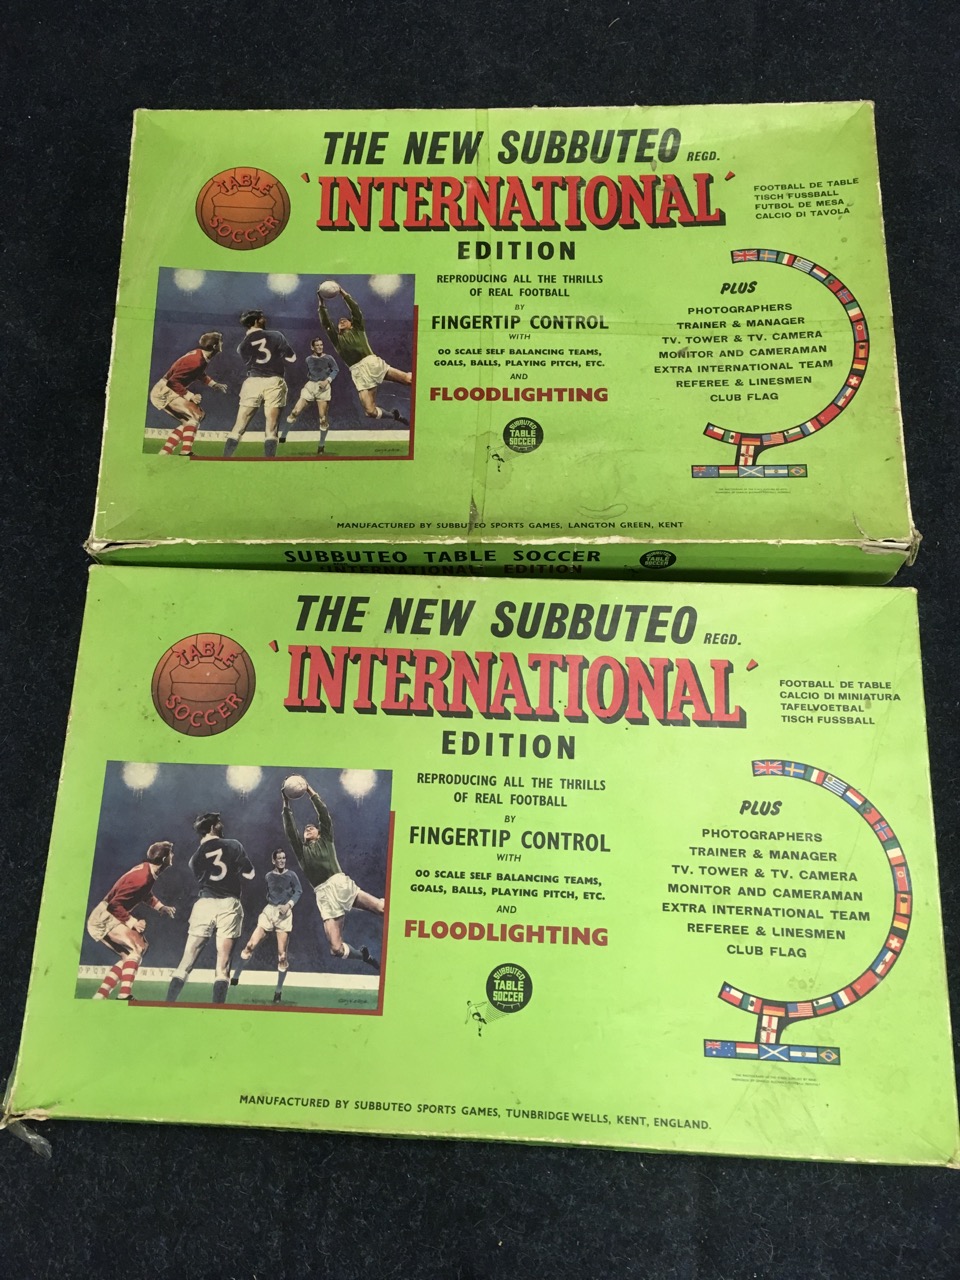 Subbuteo International Edition, two boxes with figures, cloths, goalposts, etc - incomplete. (2)